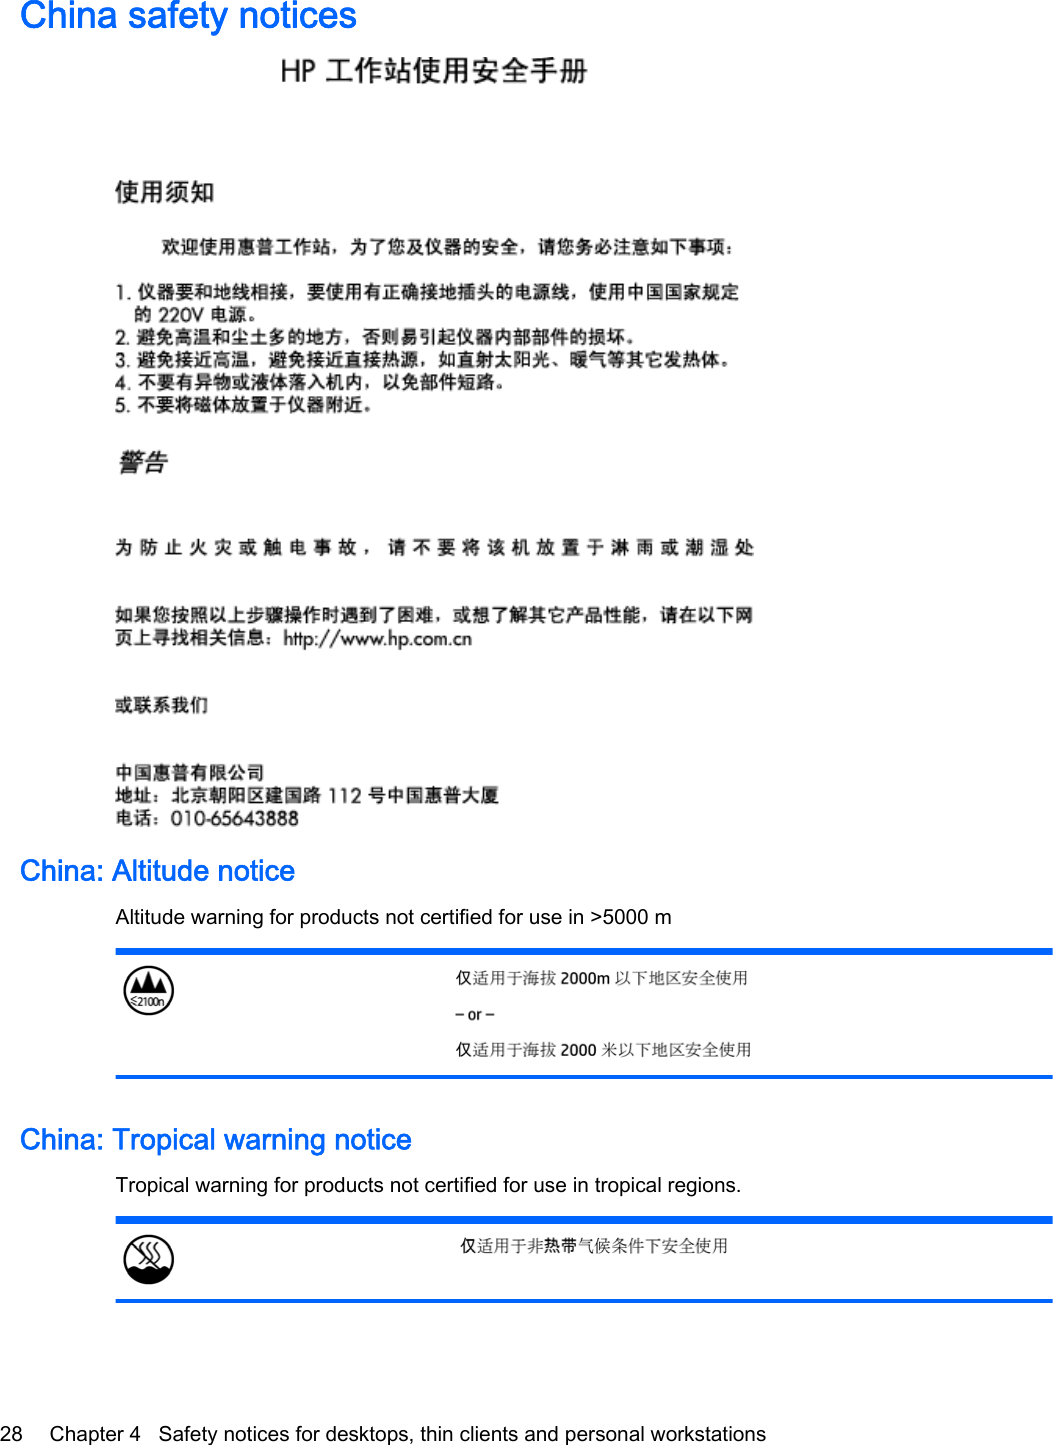 China safety noticesChina: Altitude noticeAltitude warning for products not certified for use in &gt;5000 mChina: Tropical warning noticeTropical warning for products not certified for use in tropical regions.28 Chapter 4   Safety notices for desktops, thin clients and personal workstations